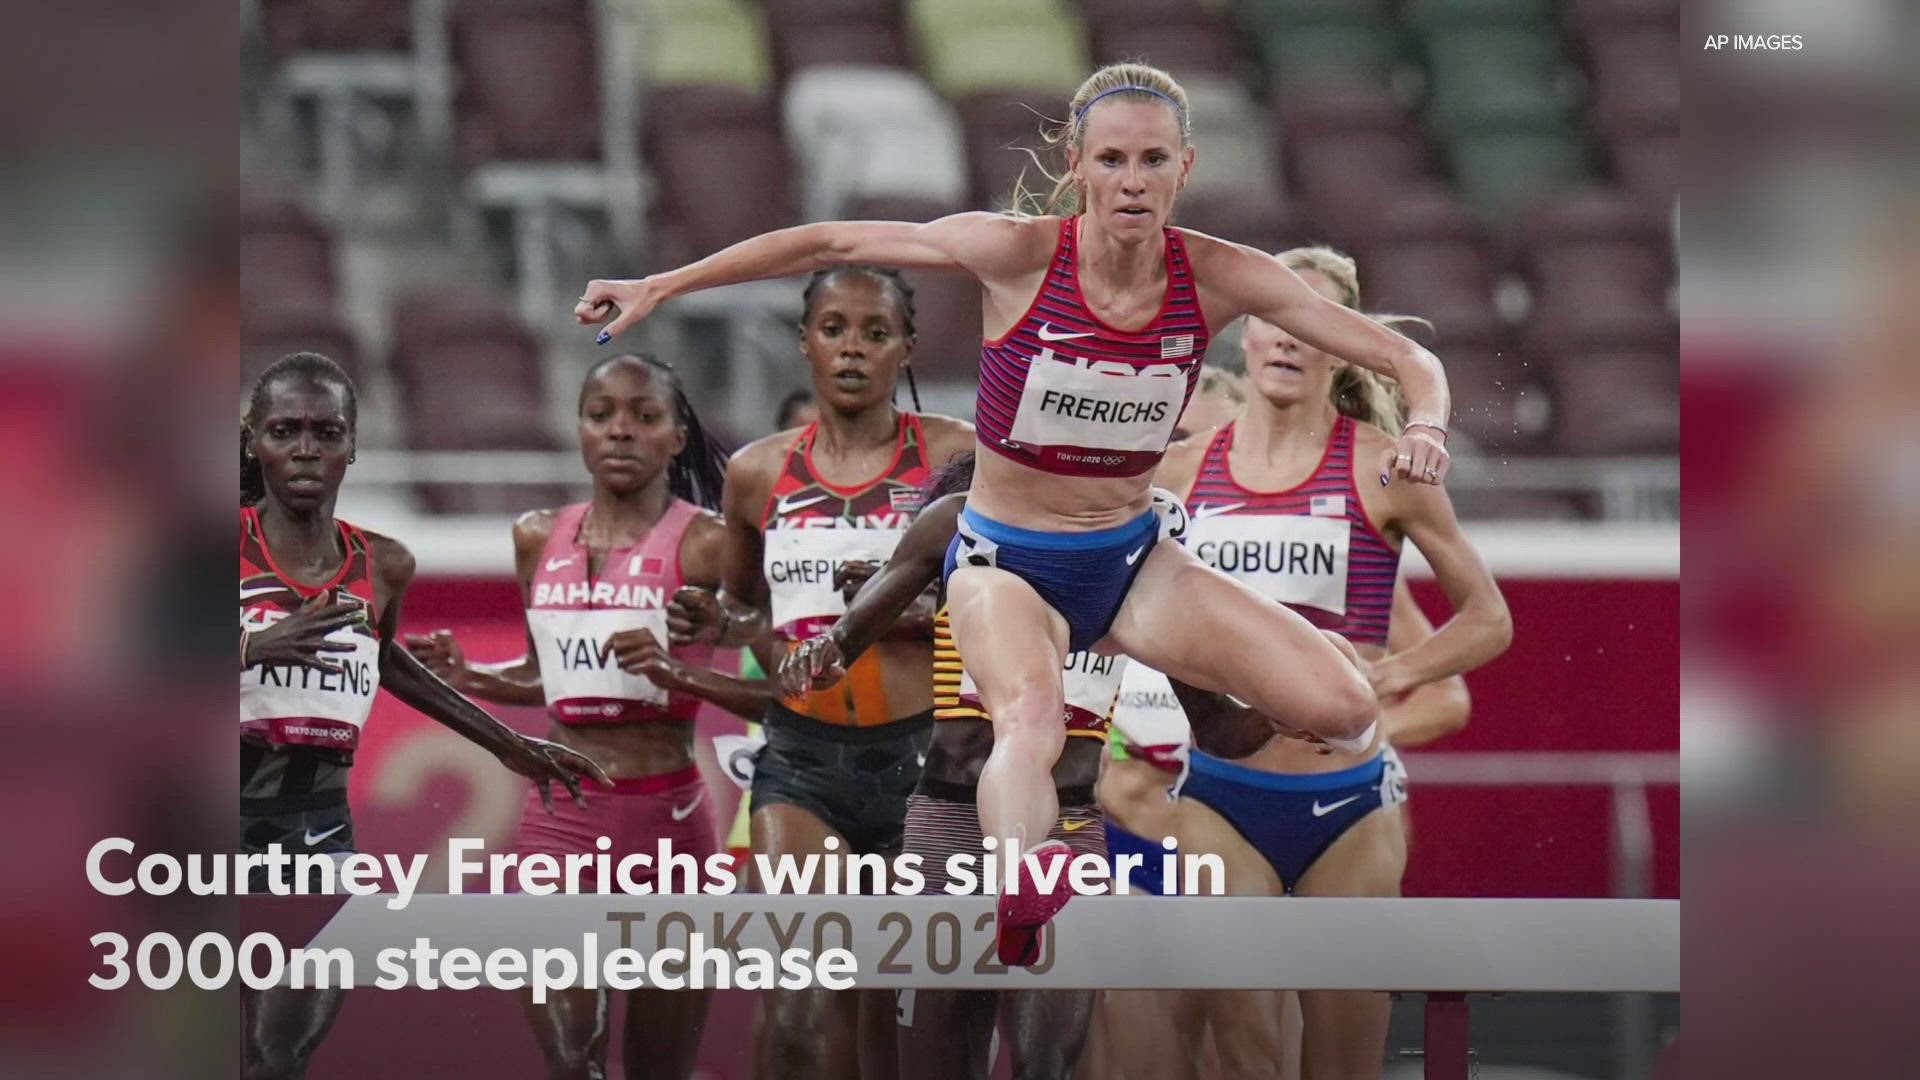 Courtney Frerichs, who lives and trains in Portland, won silver in the women's 3,000-meter steeplechase at the Tokyo Olympics on August 4.